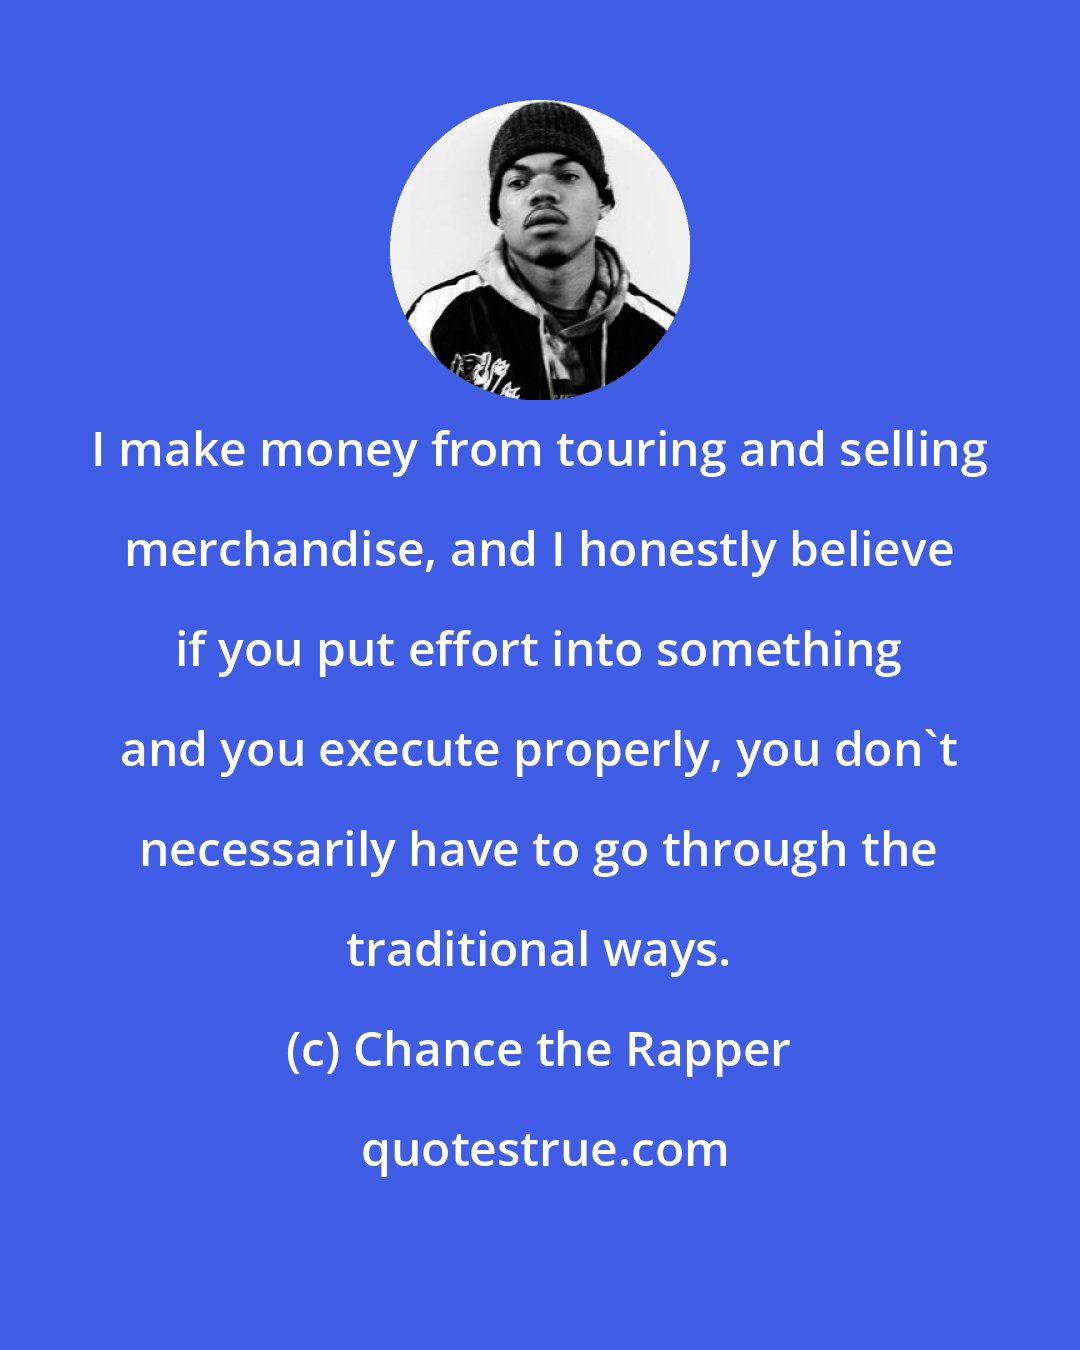 Chance the Rapper: I make money from touring and selling merchandise, and I honestly believe if you put effort into something and you execute properly, you don't necessarily have to go through the traditional ways.